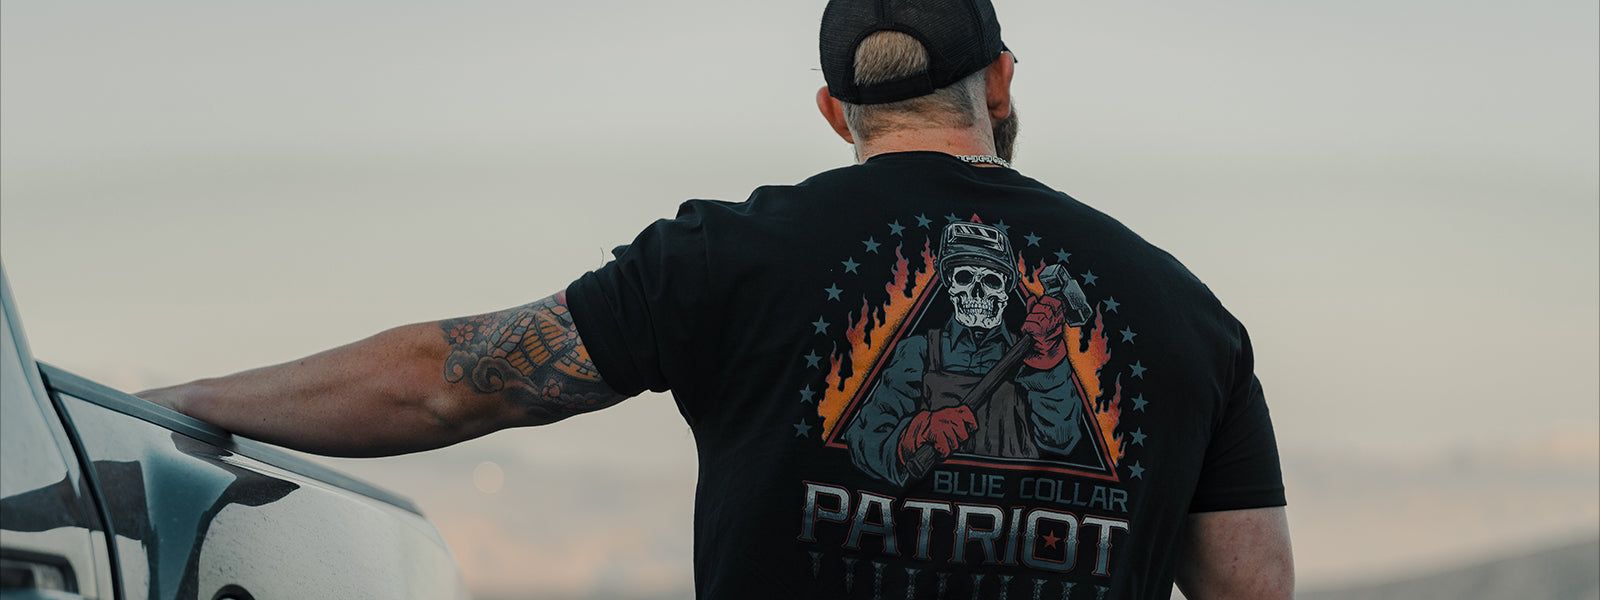 Blue Collar Patriot - Howitzer Clothing